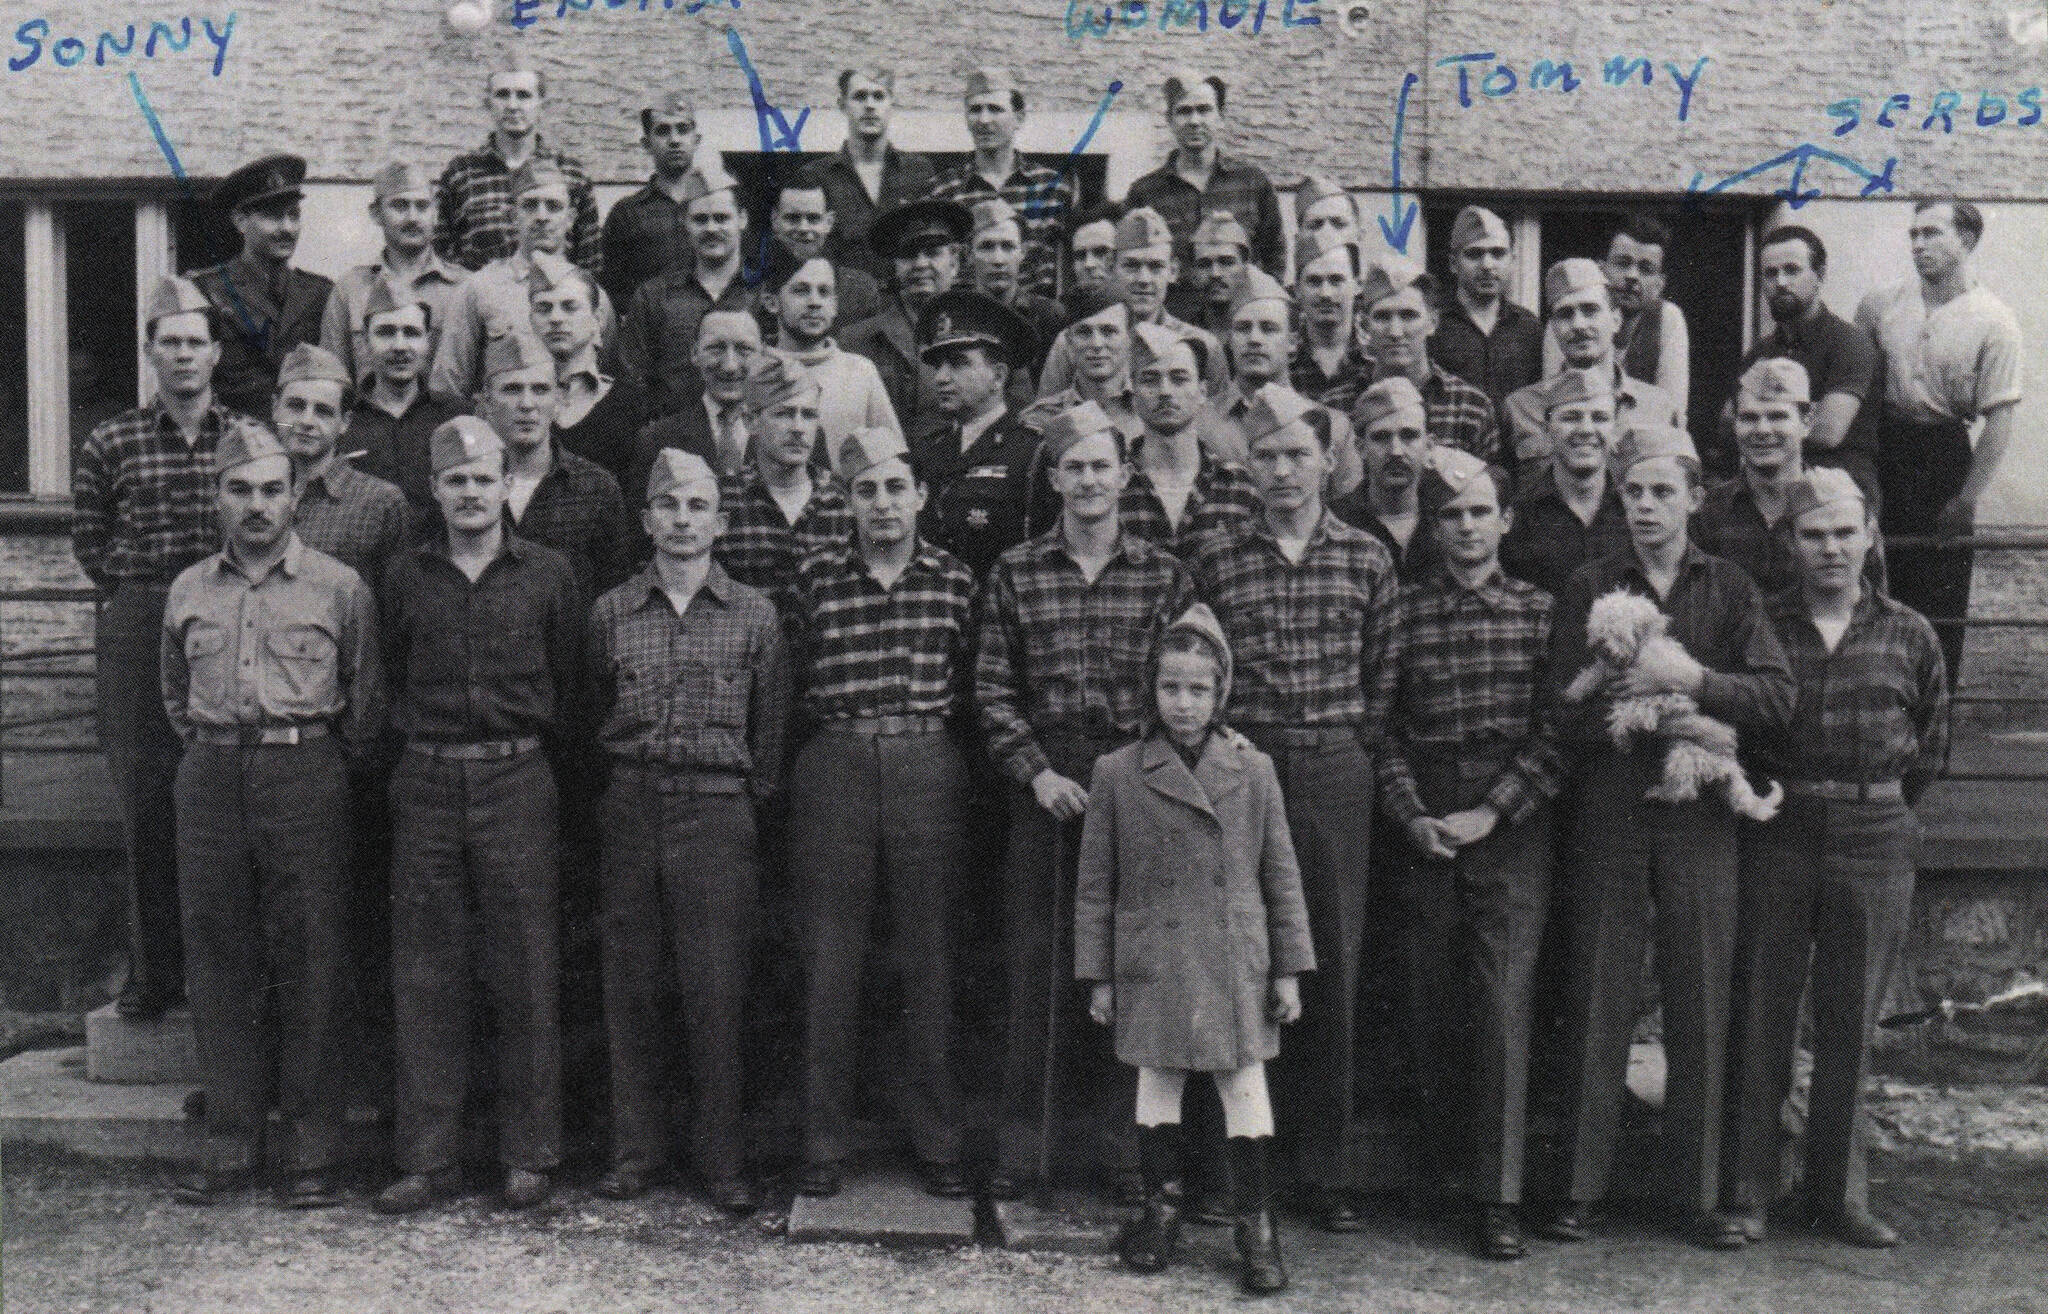 Photo courtesy of the Lancashire Family Collection
This group of prisoners of war in Romania in 1943-44 included Second Lieutenant Lawrence H. Lancashire (labeled “Sonny” here at left). Lancashire was released after more than a year in captivity.